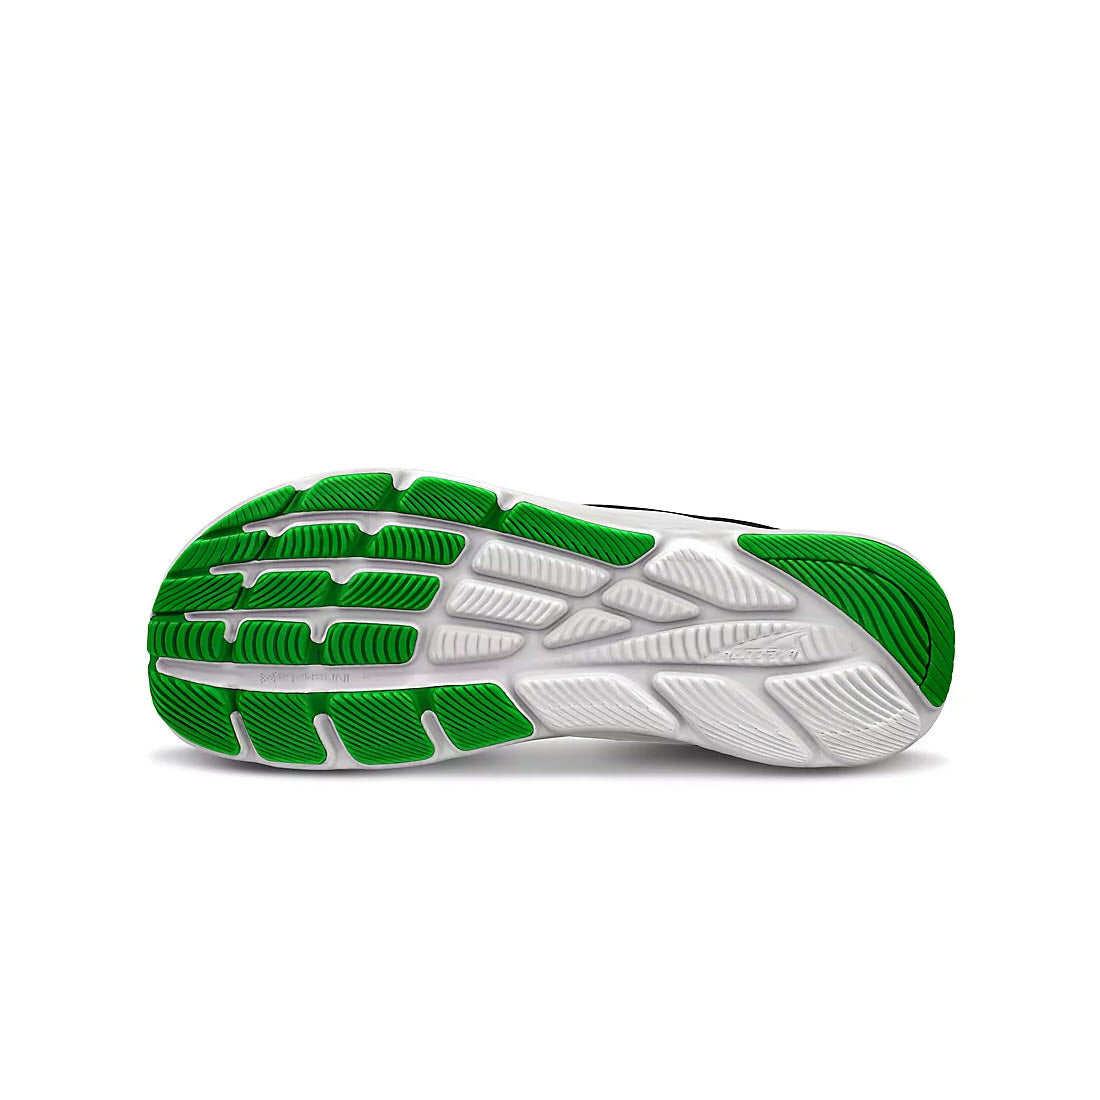 A running shoe sole with green and white rubber tread engineered for traction and a responsive midsole cushion, displayed against a white background. 
Product Name: ALTRA RIVERA 4 BLACK - MENS
Brand Name: Altra